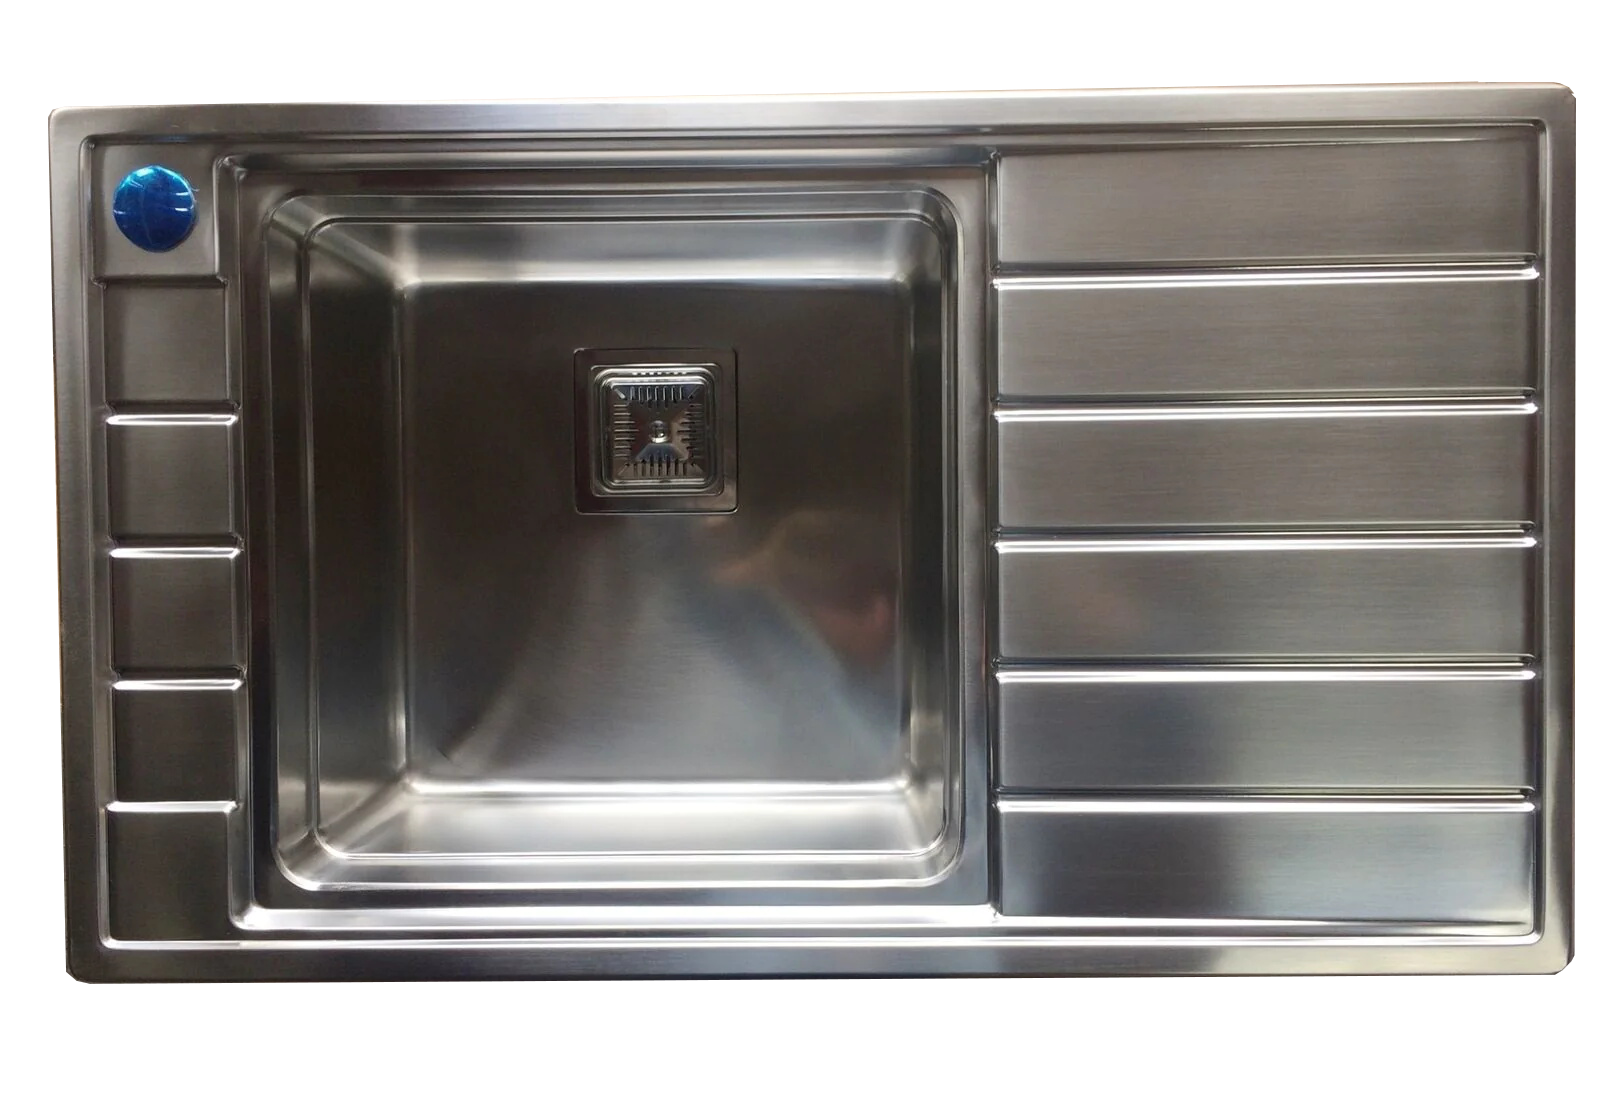 Pick up only! Kitchen Sink-304 stainless steel-DOR-SQUARE waste